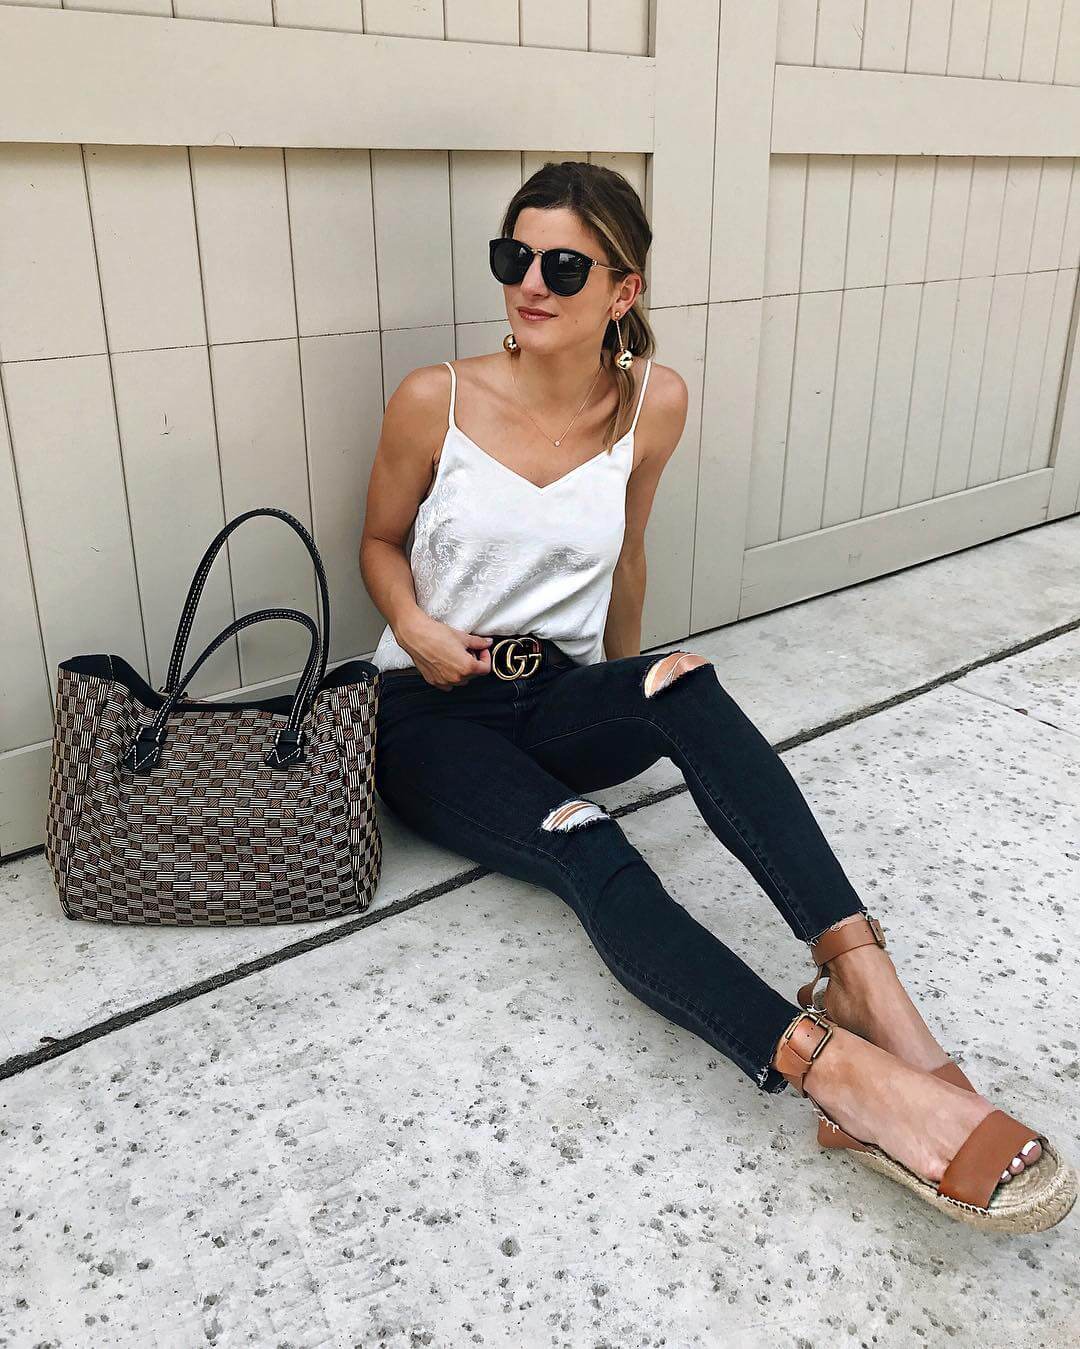 brighton keller wearing white tank with black distressed jeans and espadrilles with moreau bag